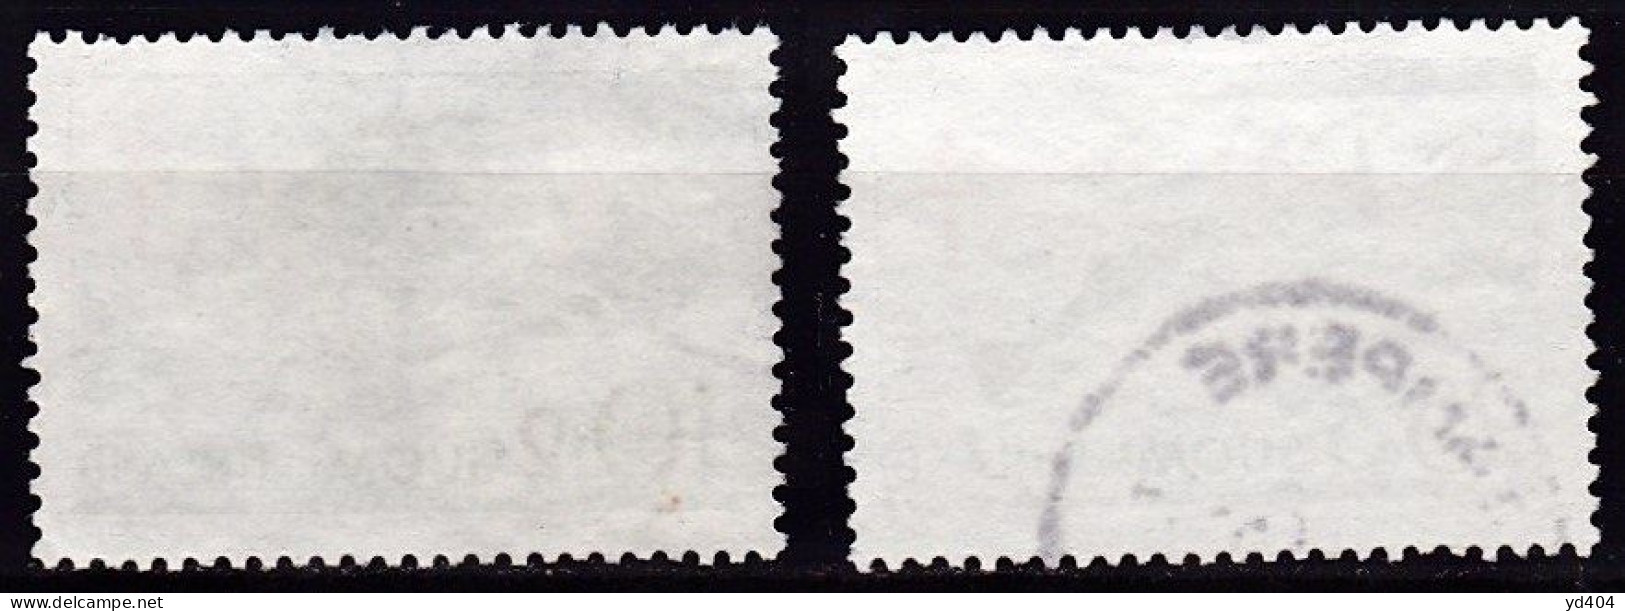 FI092B – FINLANDE – FINLAND – 1955 – ANTI-TUBERCULOSIS FUND – Y&T 426-428 USED 6 € - Used Stamps